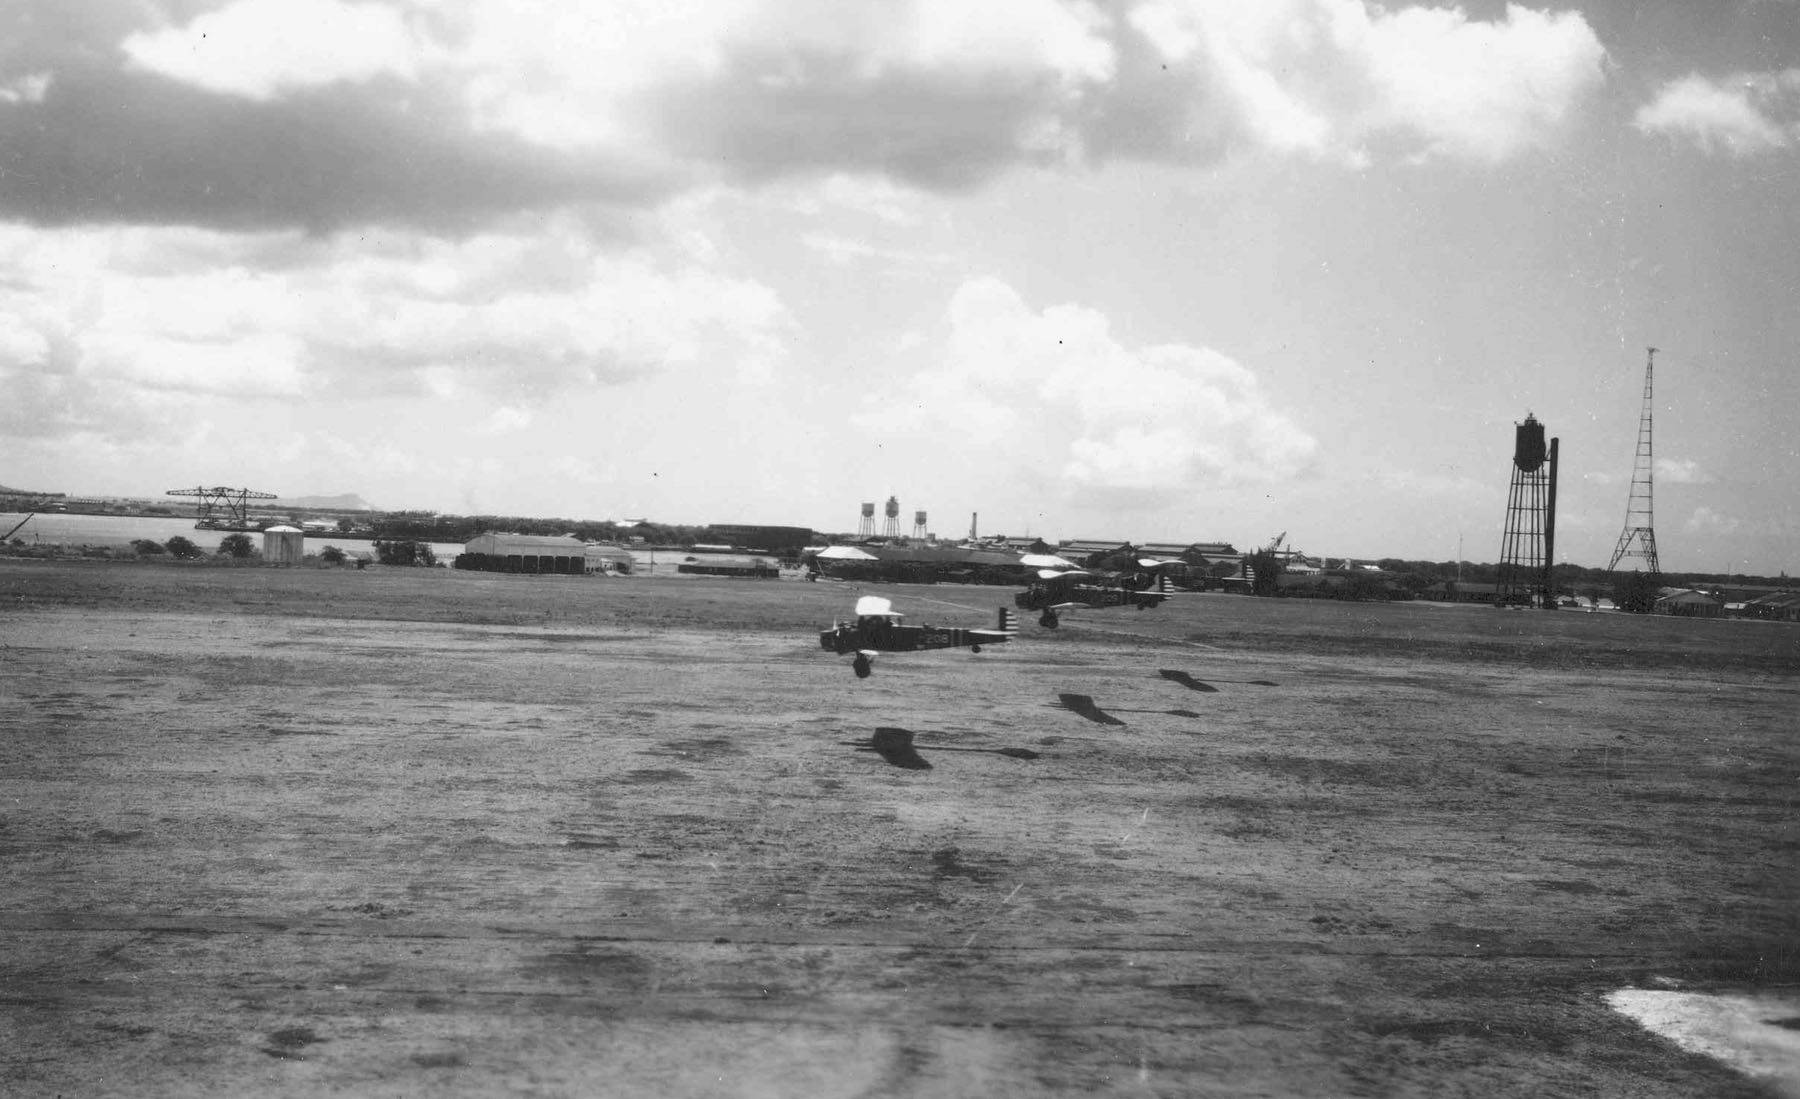 A flight of three Keystone B-3A bombers of the 23d Bombardment Squadron take off at Luke Field, Territory of Hawaii. Diamond Head is visible in the background. (U.S. Air Force)